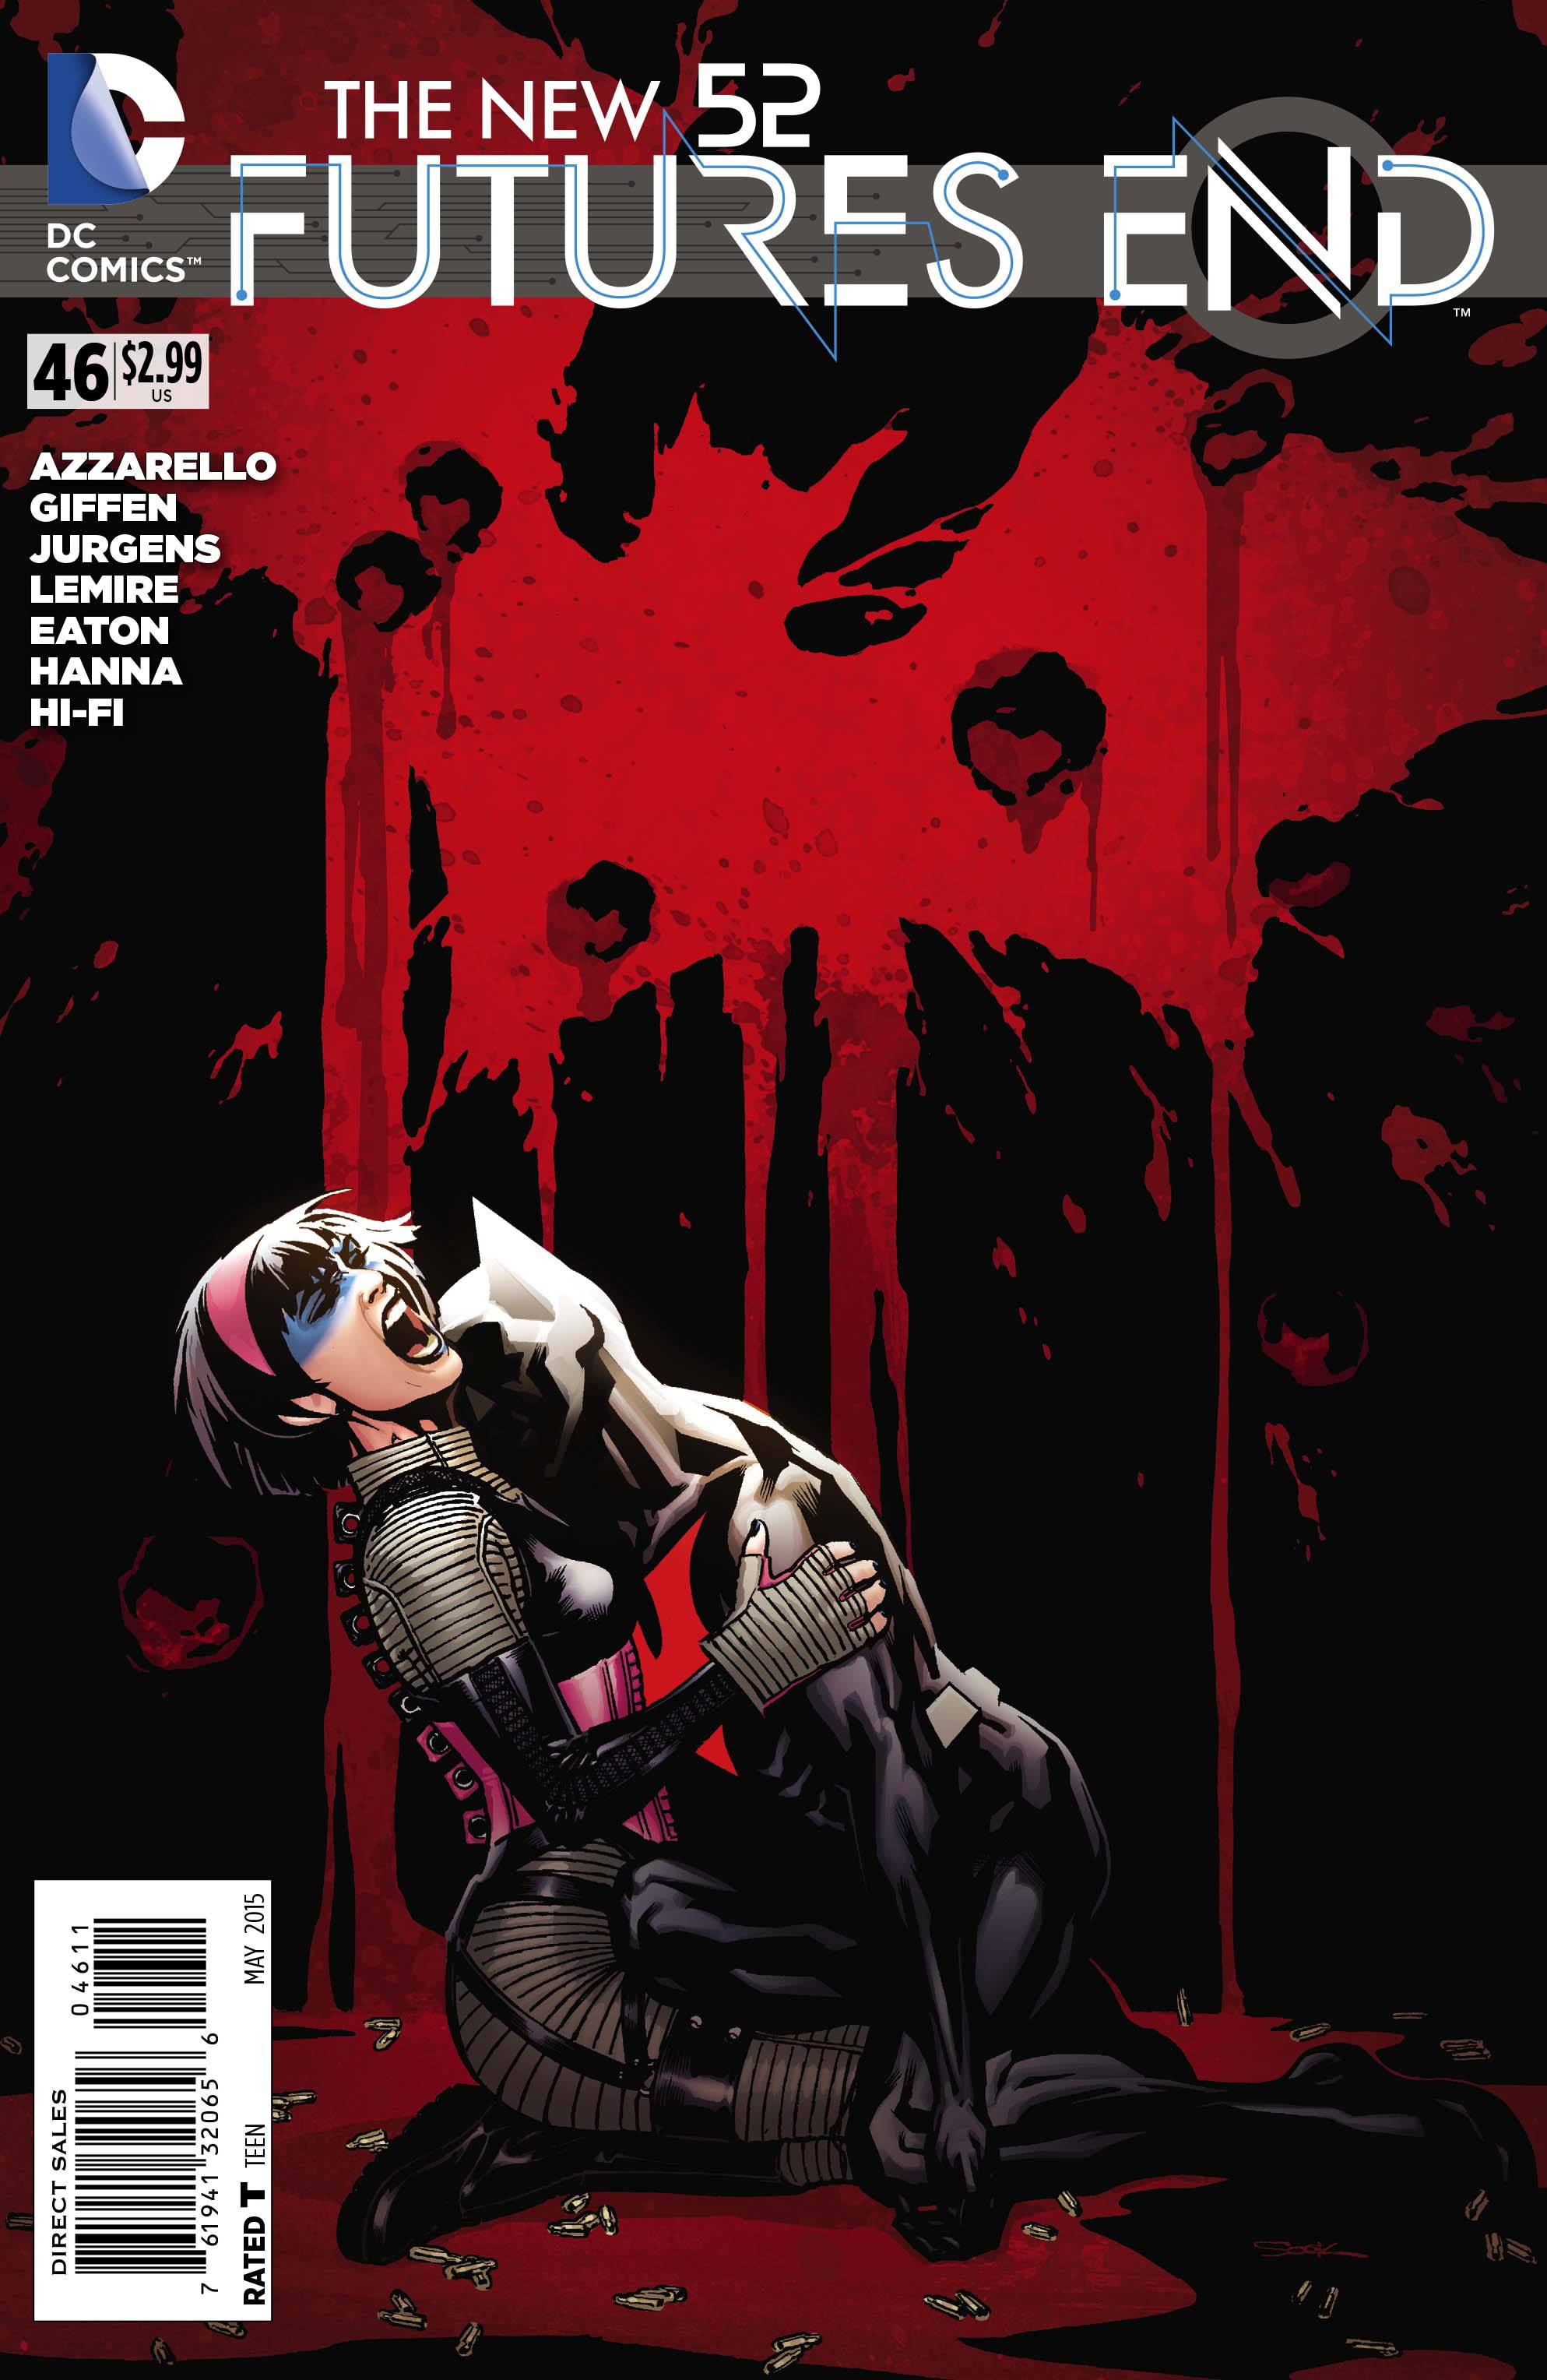 New 52 Futures End #46 (Weekly)